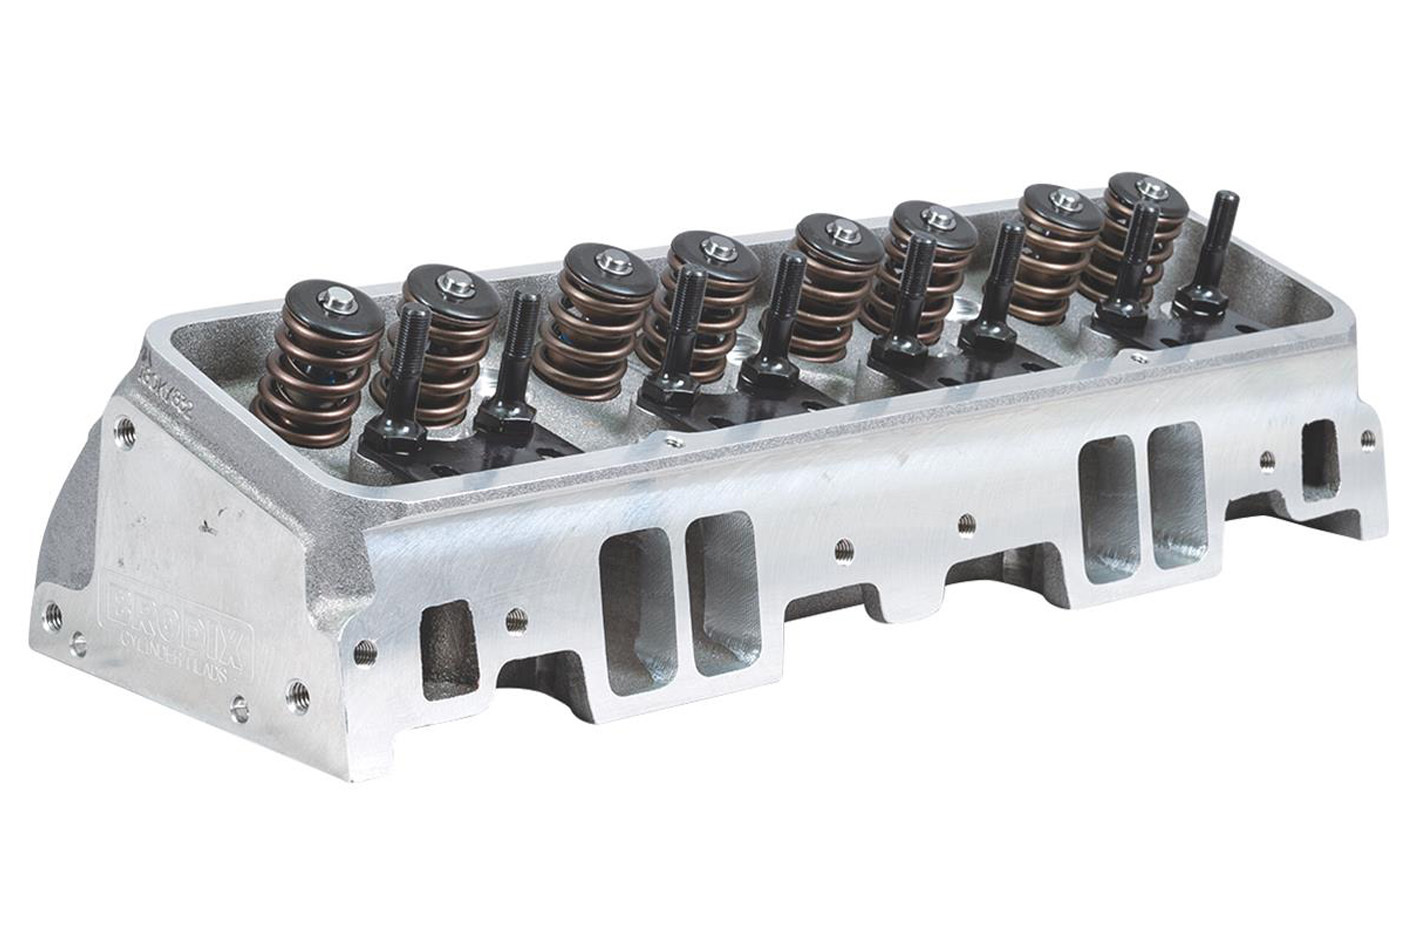 Brodix 1021004 Cylinder Head, IK 180, Assembled, 2.020 / 1.600 in Valves, 180 cc Intake, 64 cc Chamber, 1.250 in Springs, Straight Plug, Aluminum, Small Block Chevy, Pair